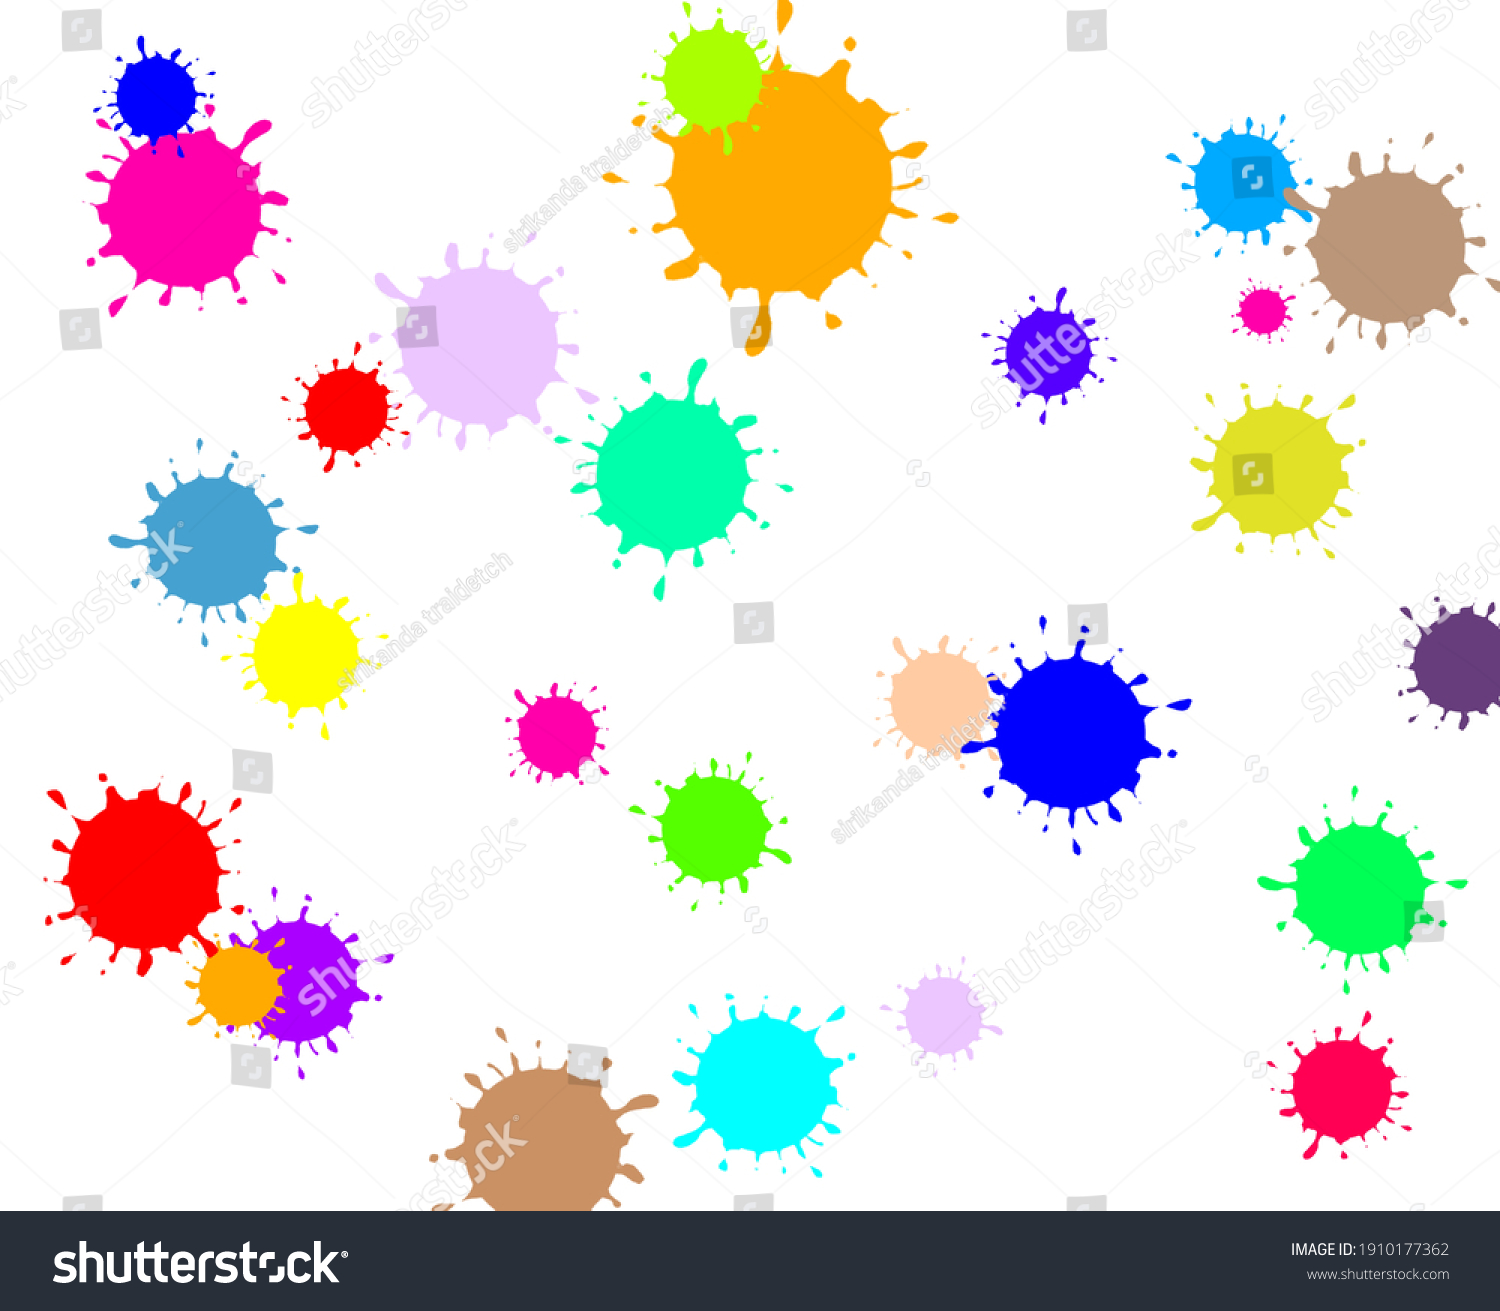 Stock Photo Colorful Background Design Element In Abstract Style Abstract Background 1910177362 